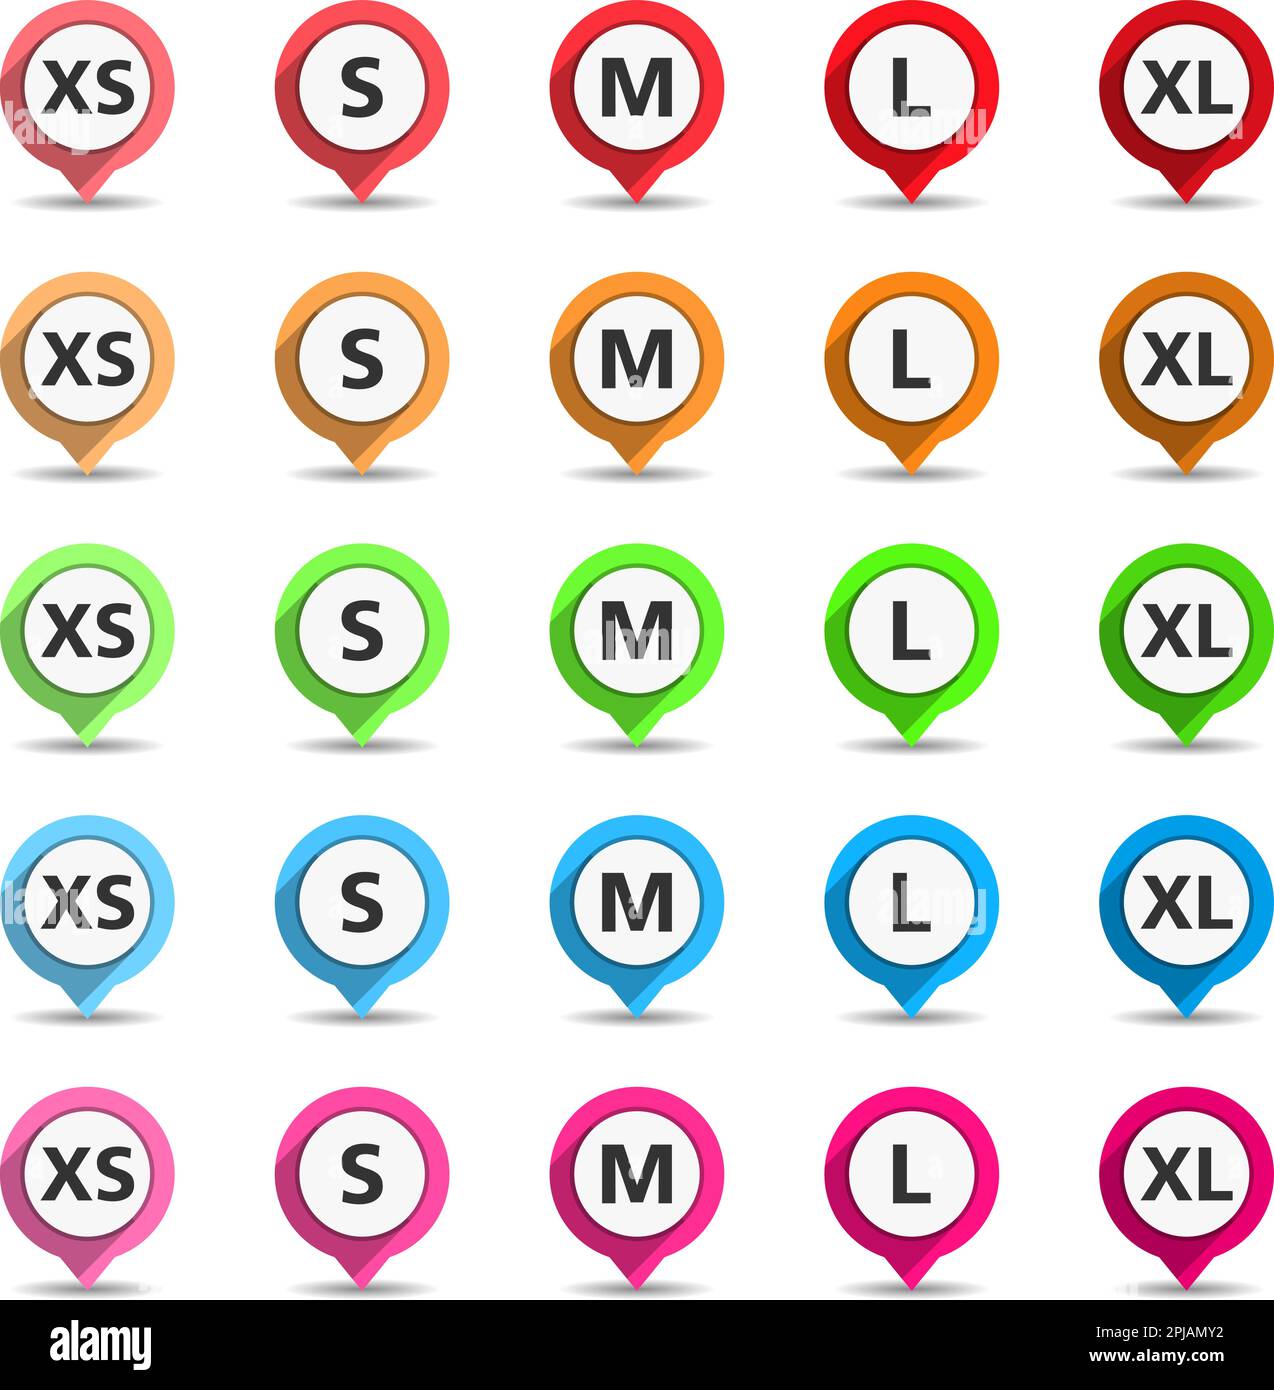 Size xxl - Download free icons